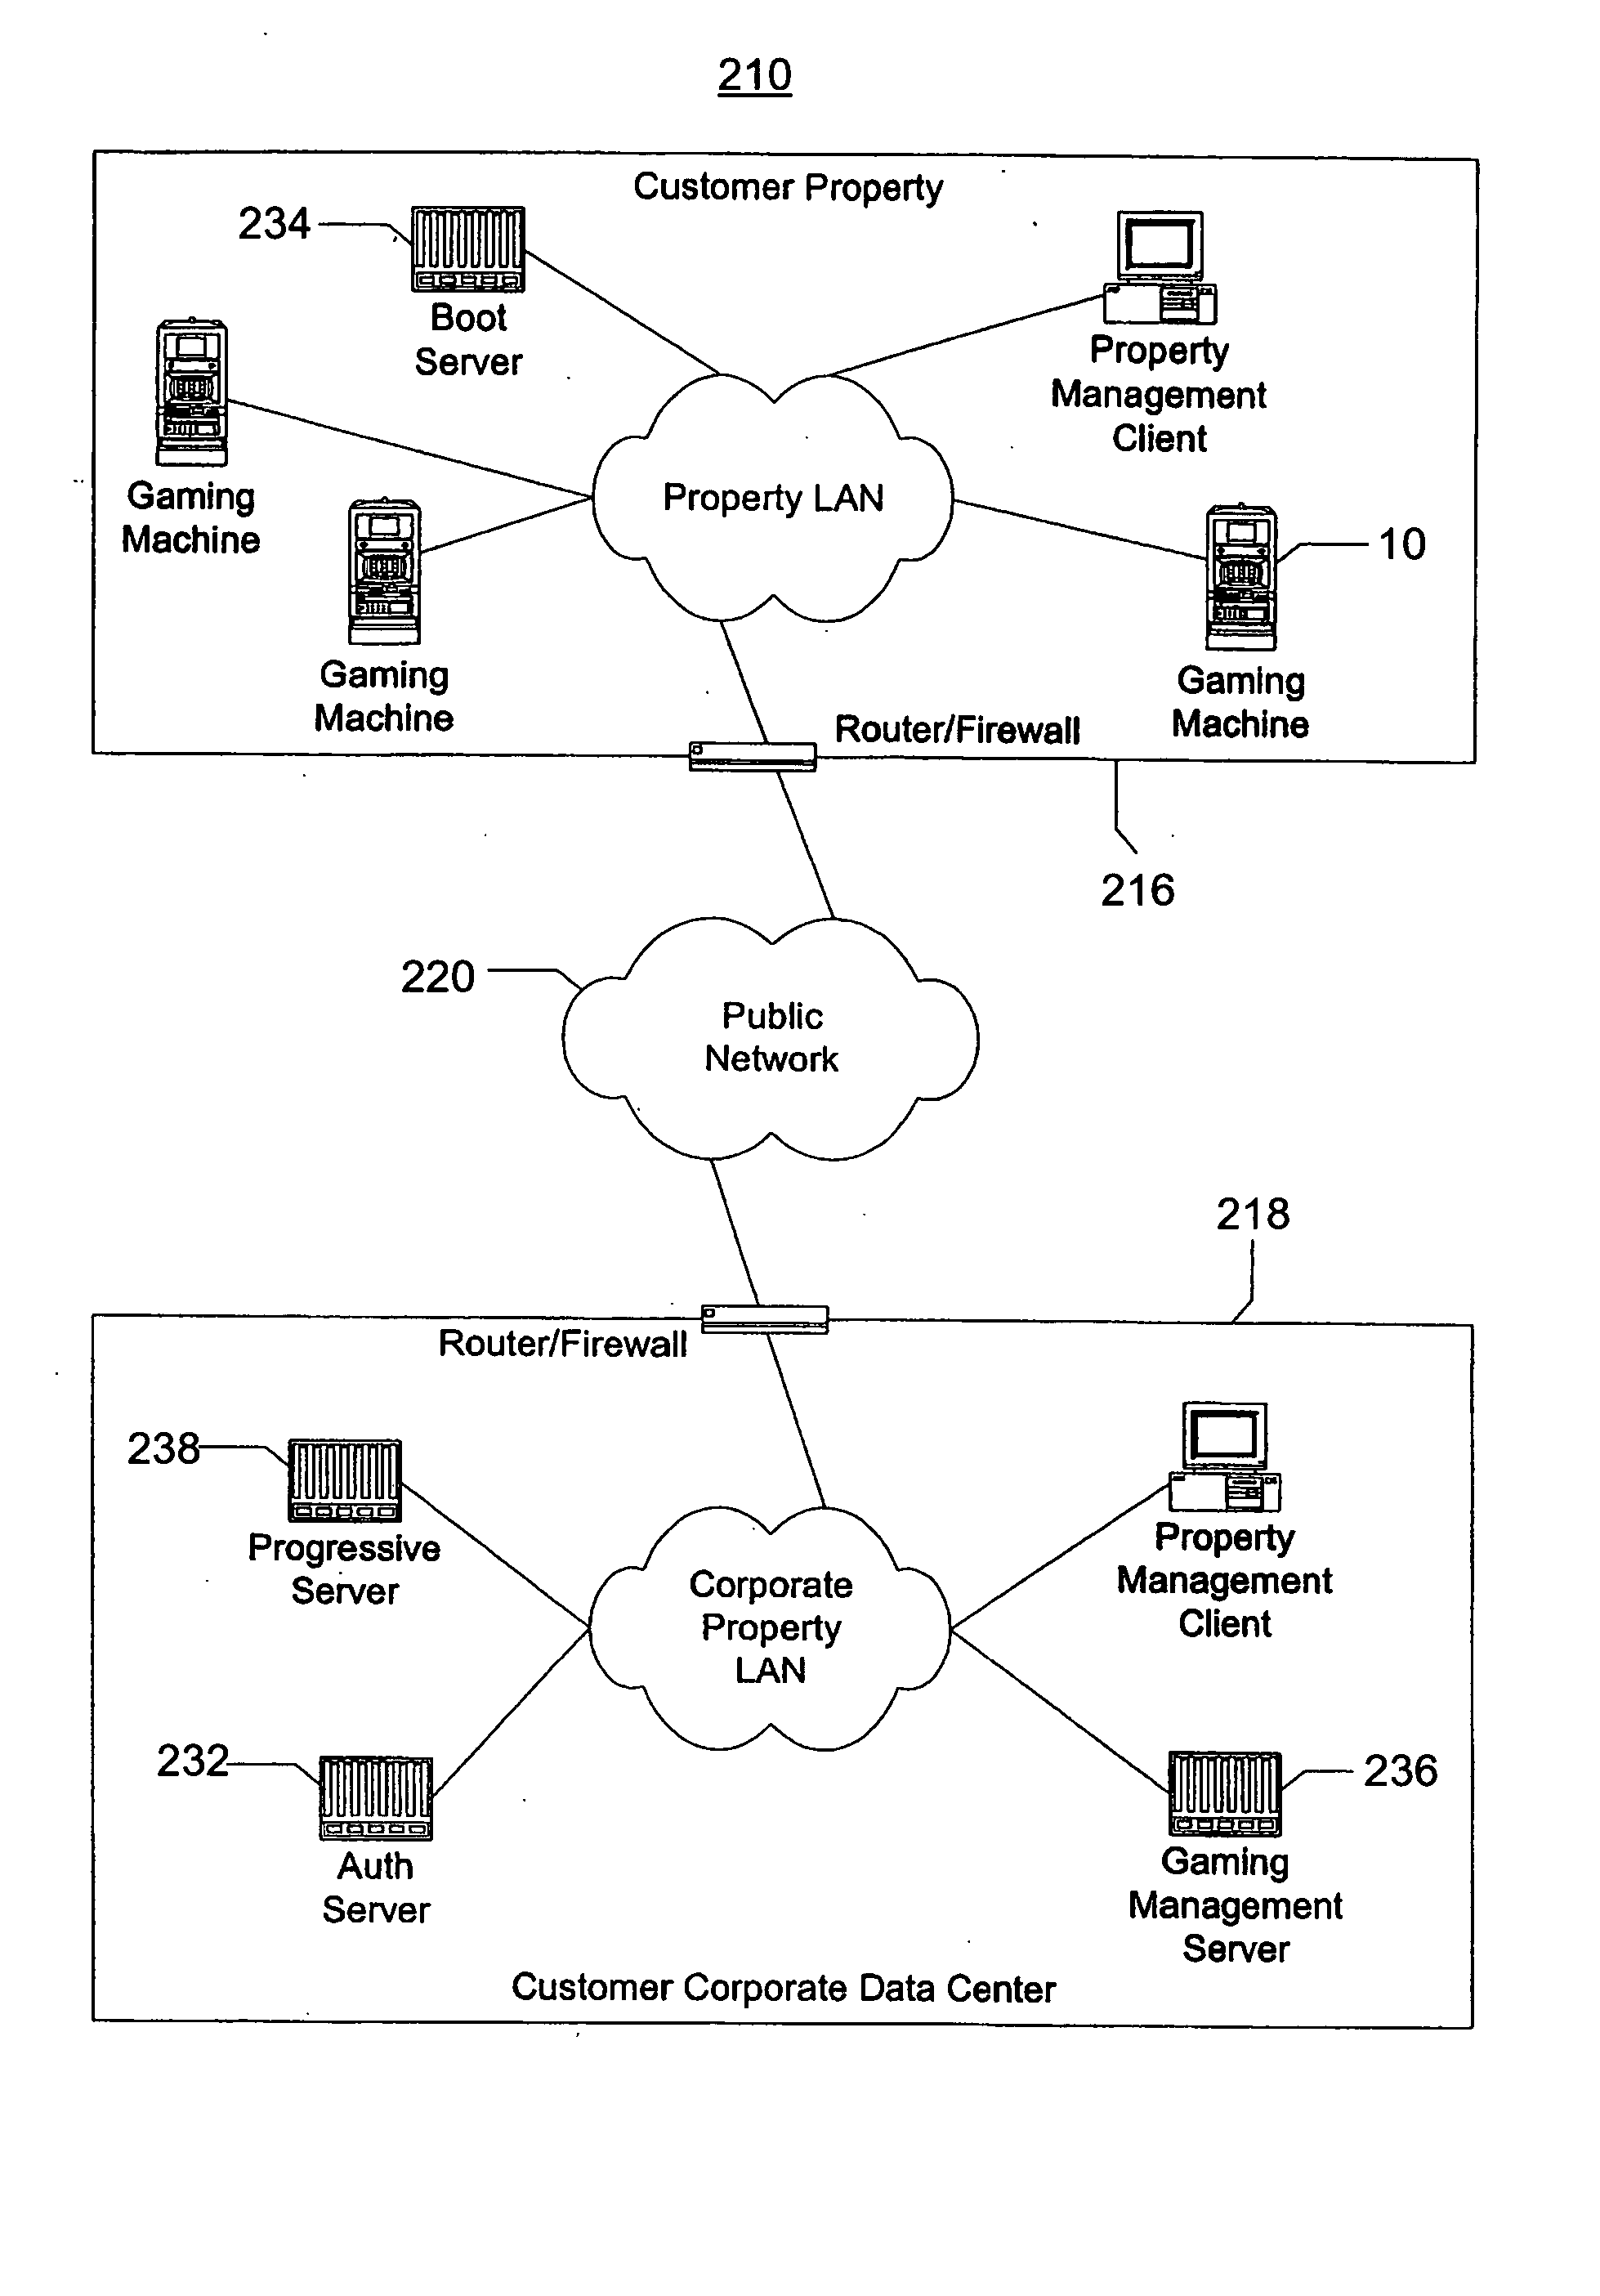 Message director service in a service-oriented gaming network environment